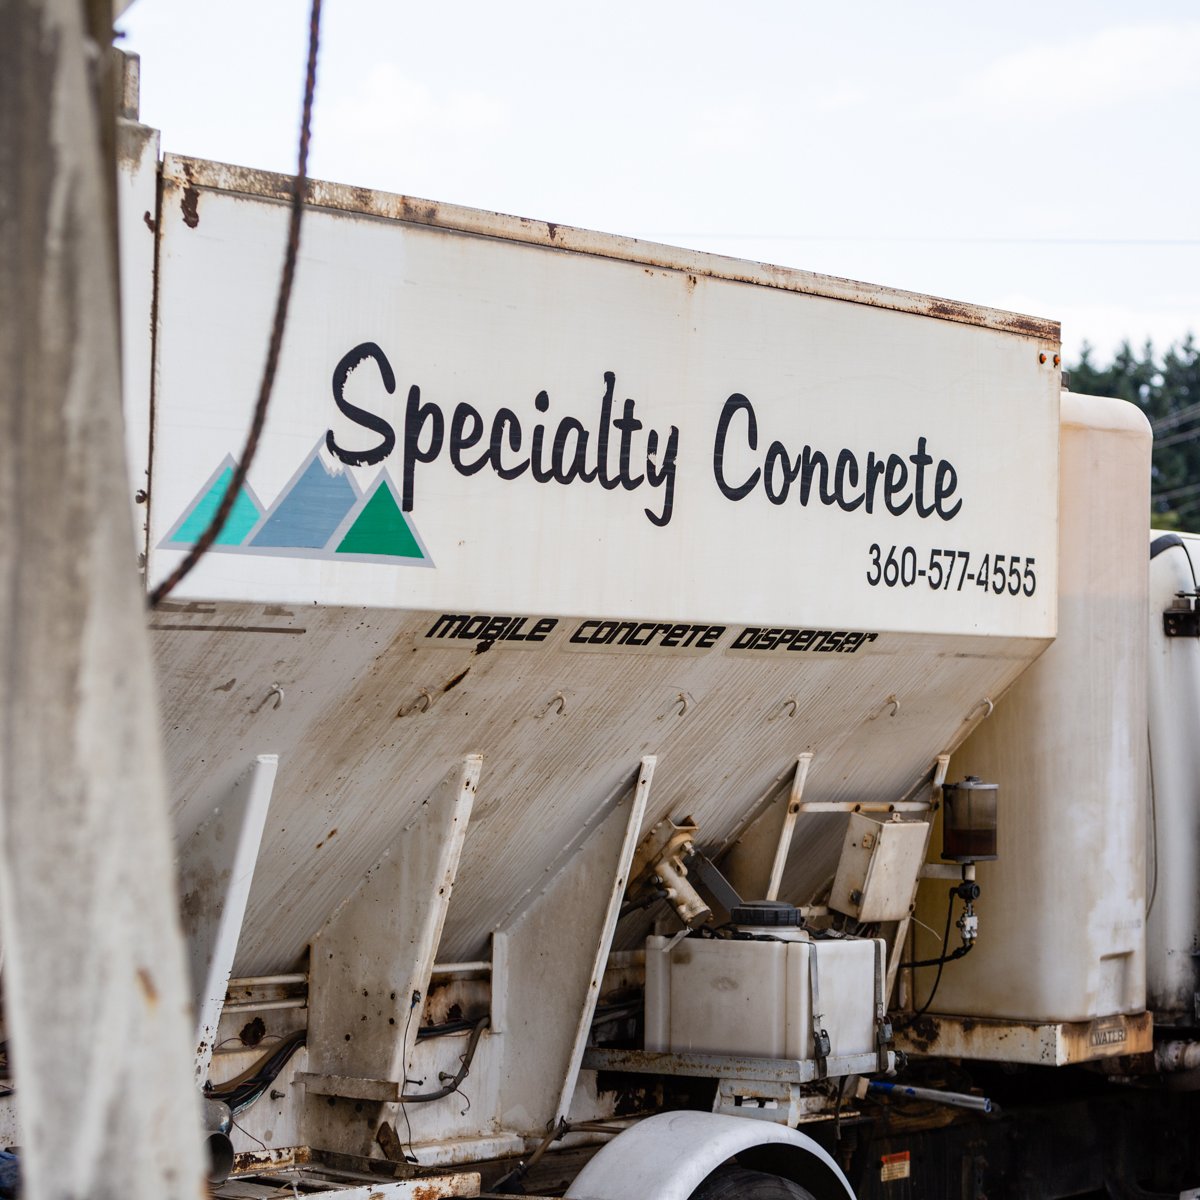 With over 13 years of industry experience to our name, we're the team you can trust when you need a fresh concrete mix. #SpecialtyConcrete #ConcreteMixing #Concrete #ConcreteSlab #KelsoWA